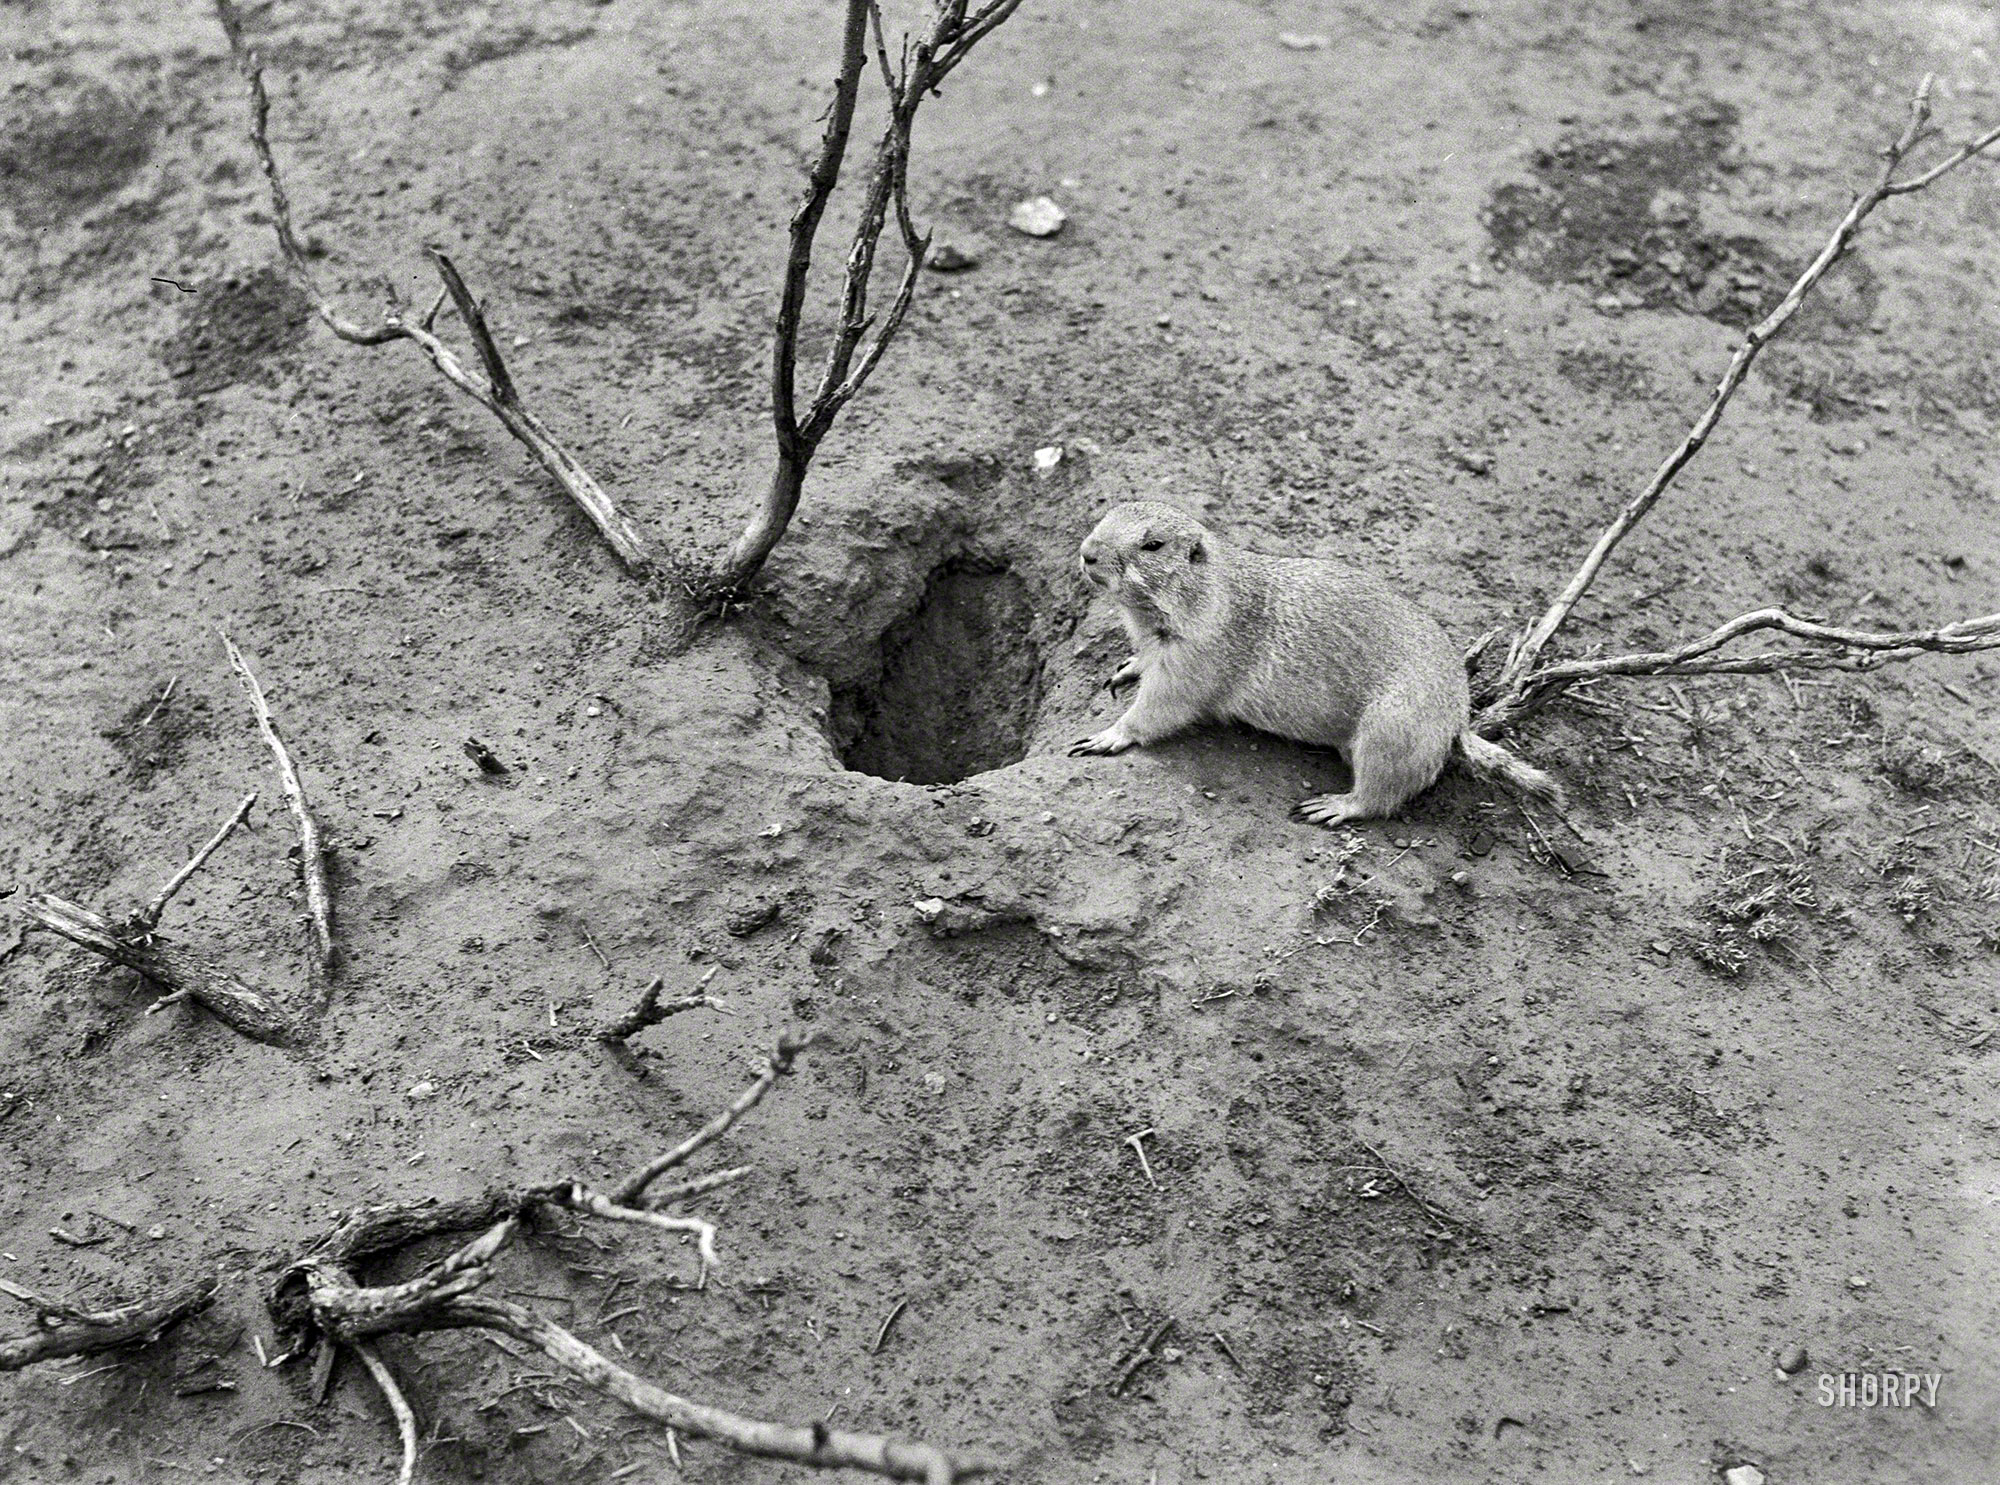 &nbsp; &nbsp; &nbsp; &nbsp; Classified as a marmot, the groundhog is a member of the squirrel family, Sciuridae, within the order Rodentia. Also called a woodchuck, it is considered basically a giant North American ground squirrel. -- Encyclopaedia Britannica
This little fellow, snapped circa 1939 by Jack Allison for the Farm Security Admin&shy;istration, didn't rate a caption, so we can't say for sure where he is other than his front porch. Whereas he used to live in a hole in the ground, his two-dimensional self now resides in the archives of the Library of Congress. View full size.